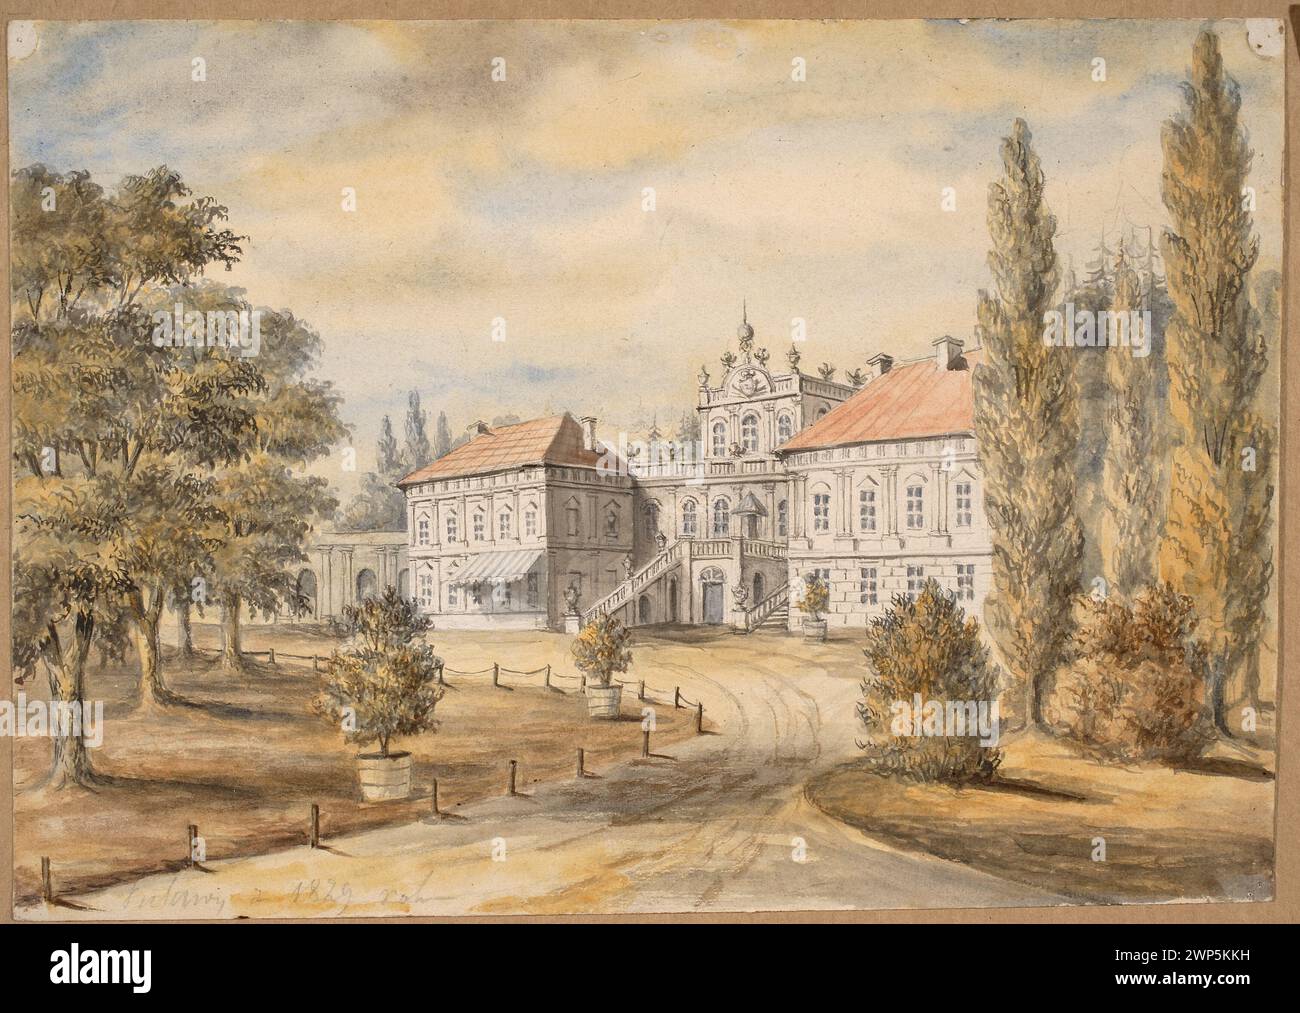 Pa AC in Pułch from the drive side in 1829; Orda, Napoleon (1807-1883), Richter, Joseph (1780-1837); before 1880 (1860-00-00-1880-00-00);Czartoryski (family)-residences, Puławy (Lubelskie Voivodeship), Smolikowski, Seweryn (1809-1897), Smolikowski, Seweryn (1809-1897)-collections, Smolikowski, Seweryn (1850-1920), Smolikowski, Seweryn (1850-1920 ) - collection, baroque (architect), gift (provenance), copies with watercolors, English parks, palaces (archite.), Poland (culture), Polish drawings Stock Photo